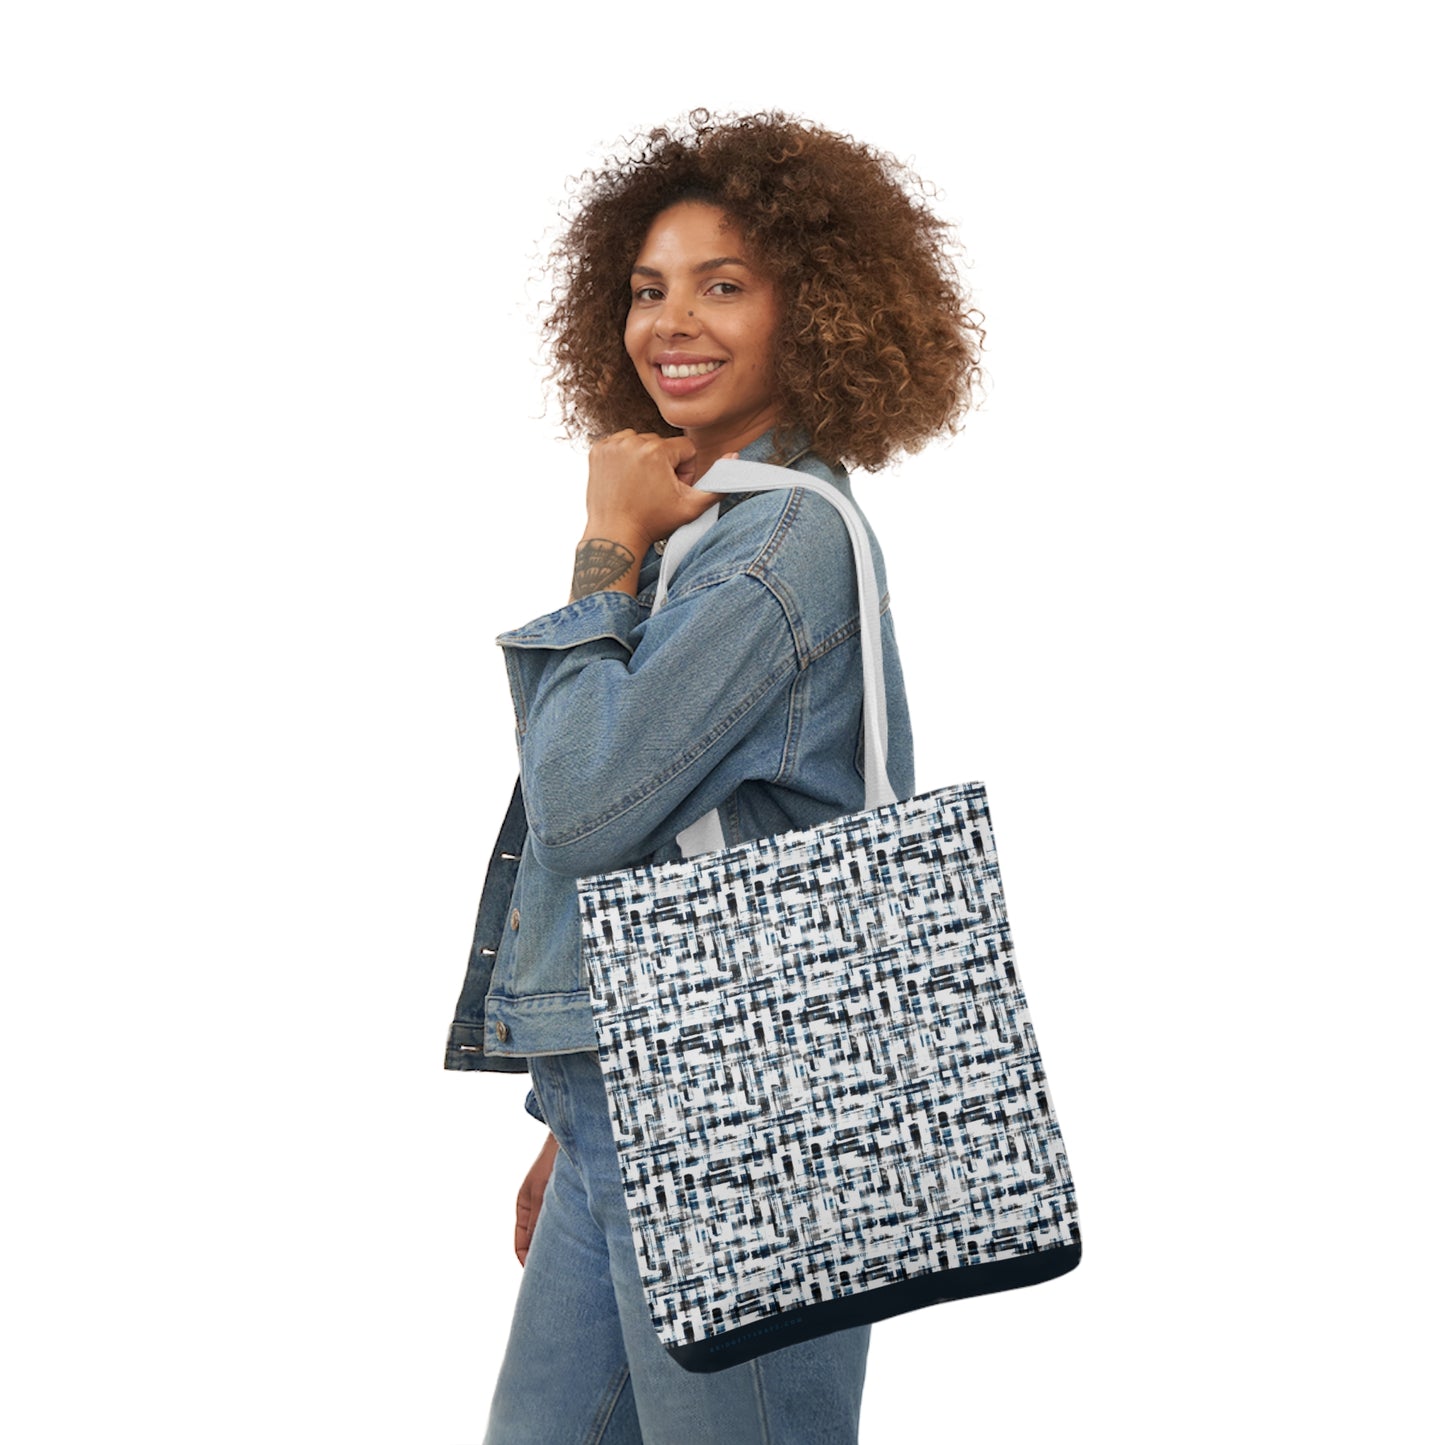 Black Busy Tweed Polyester Canvas Tote Bag